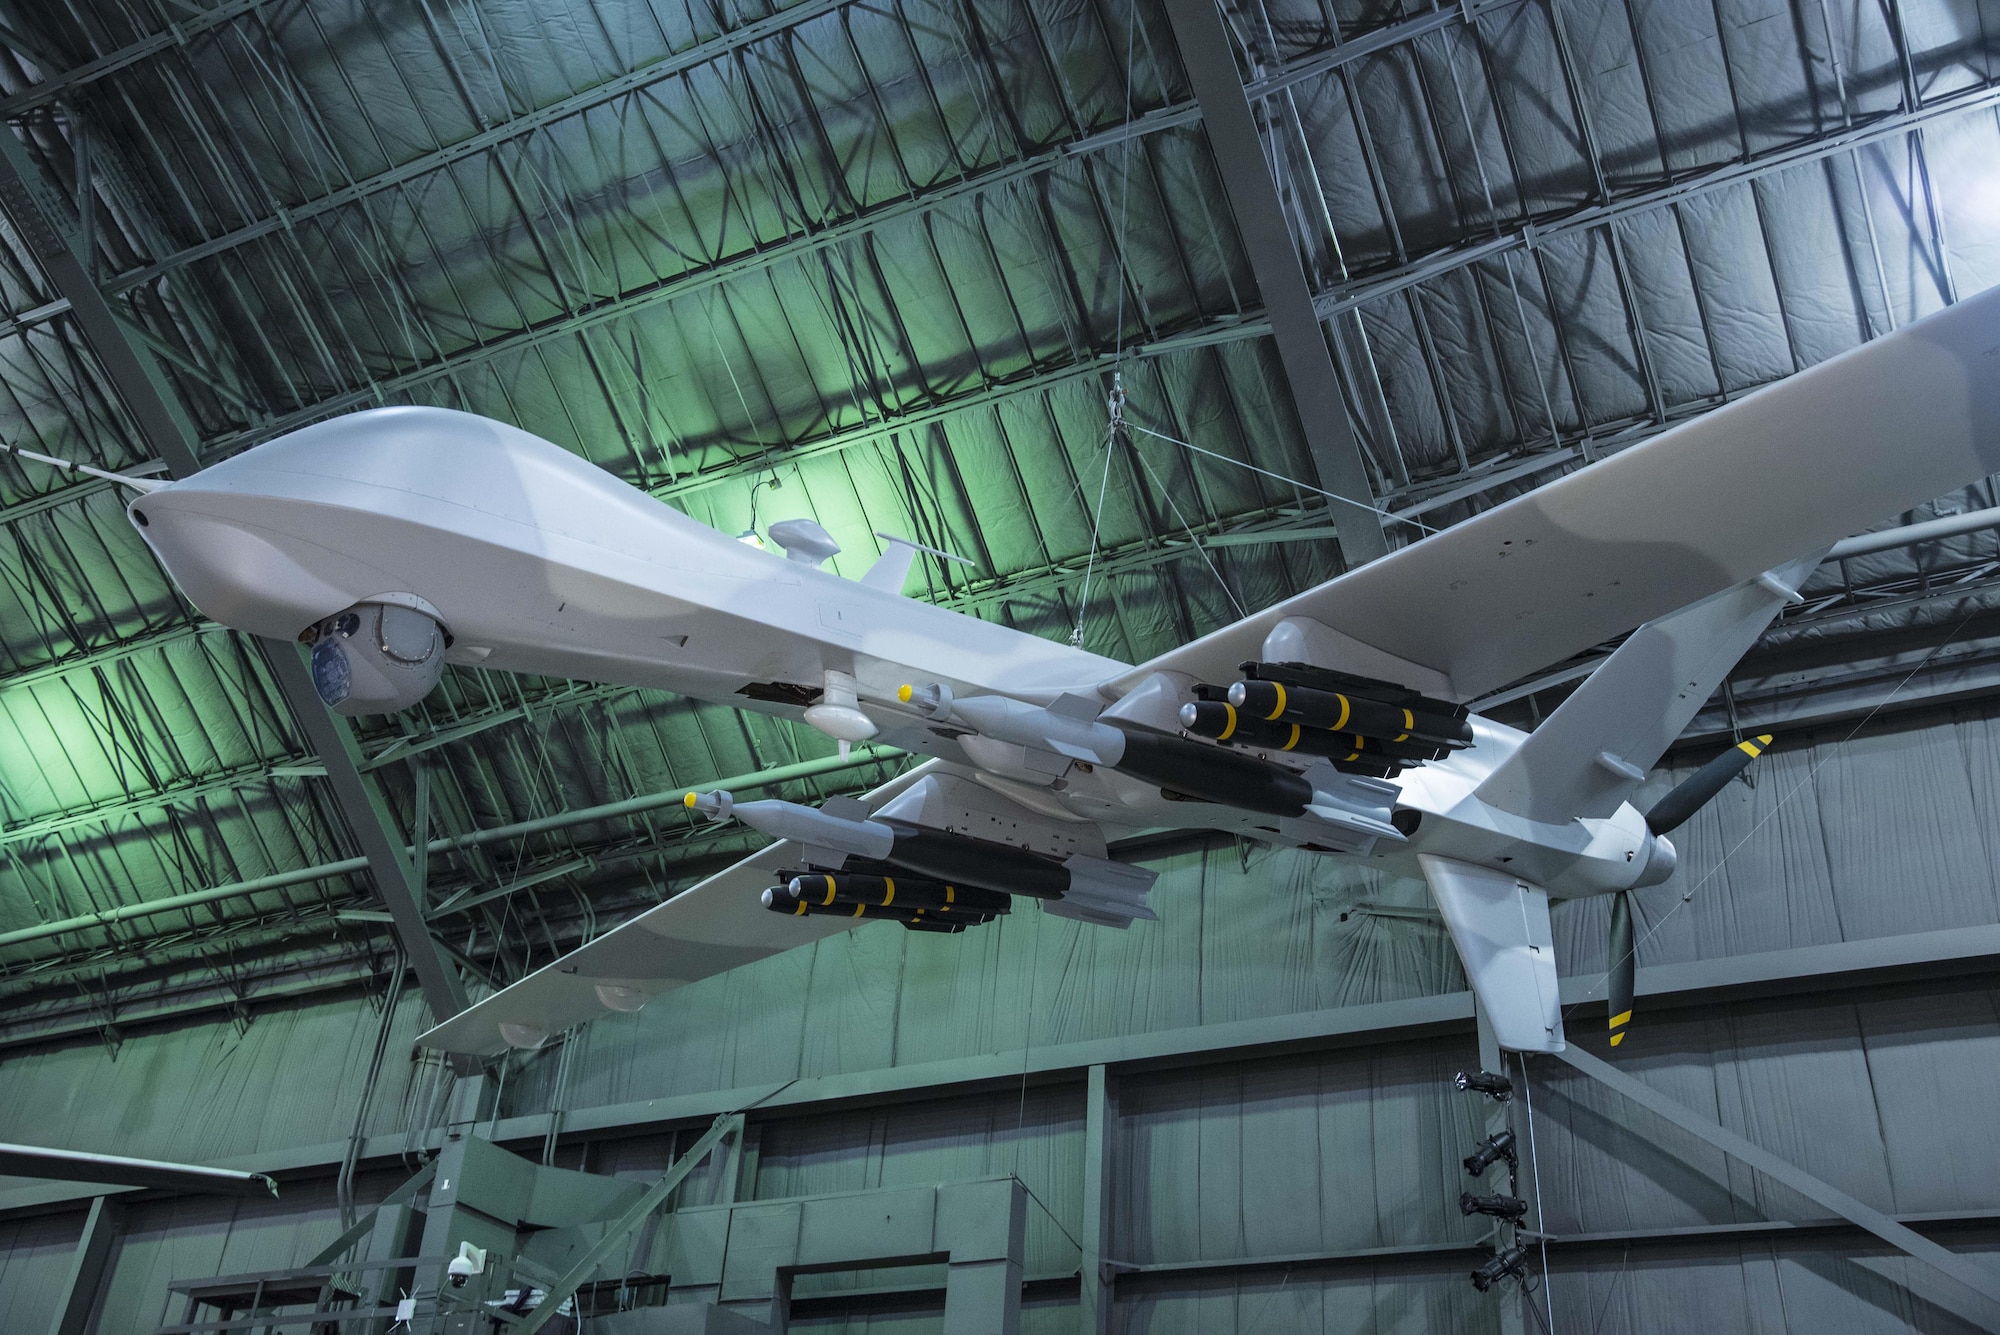 DAYTON, Ohio -- General Atomics YMQ-9 Reaper at the National Museum of the U.S. Air Force. (U.S. Air Force photo by Ken LaRock)